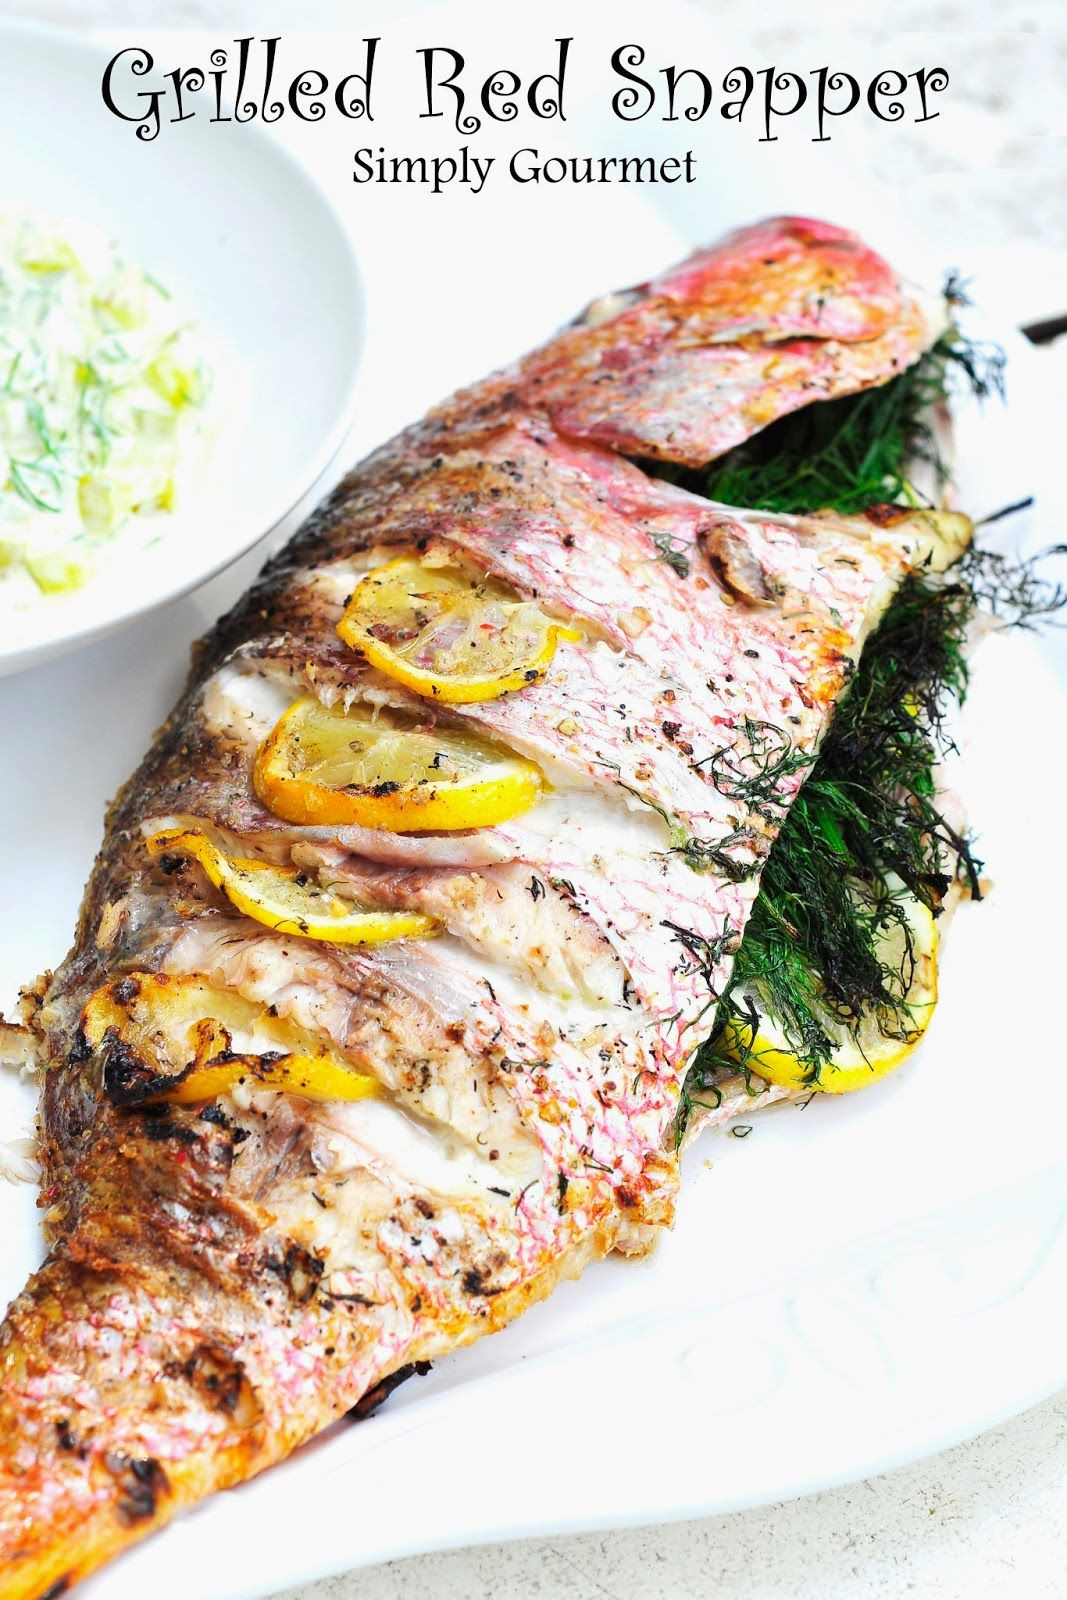 Red Snapper Fish Recipes
 Grilled Red Snapper